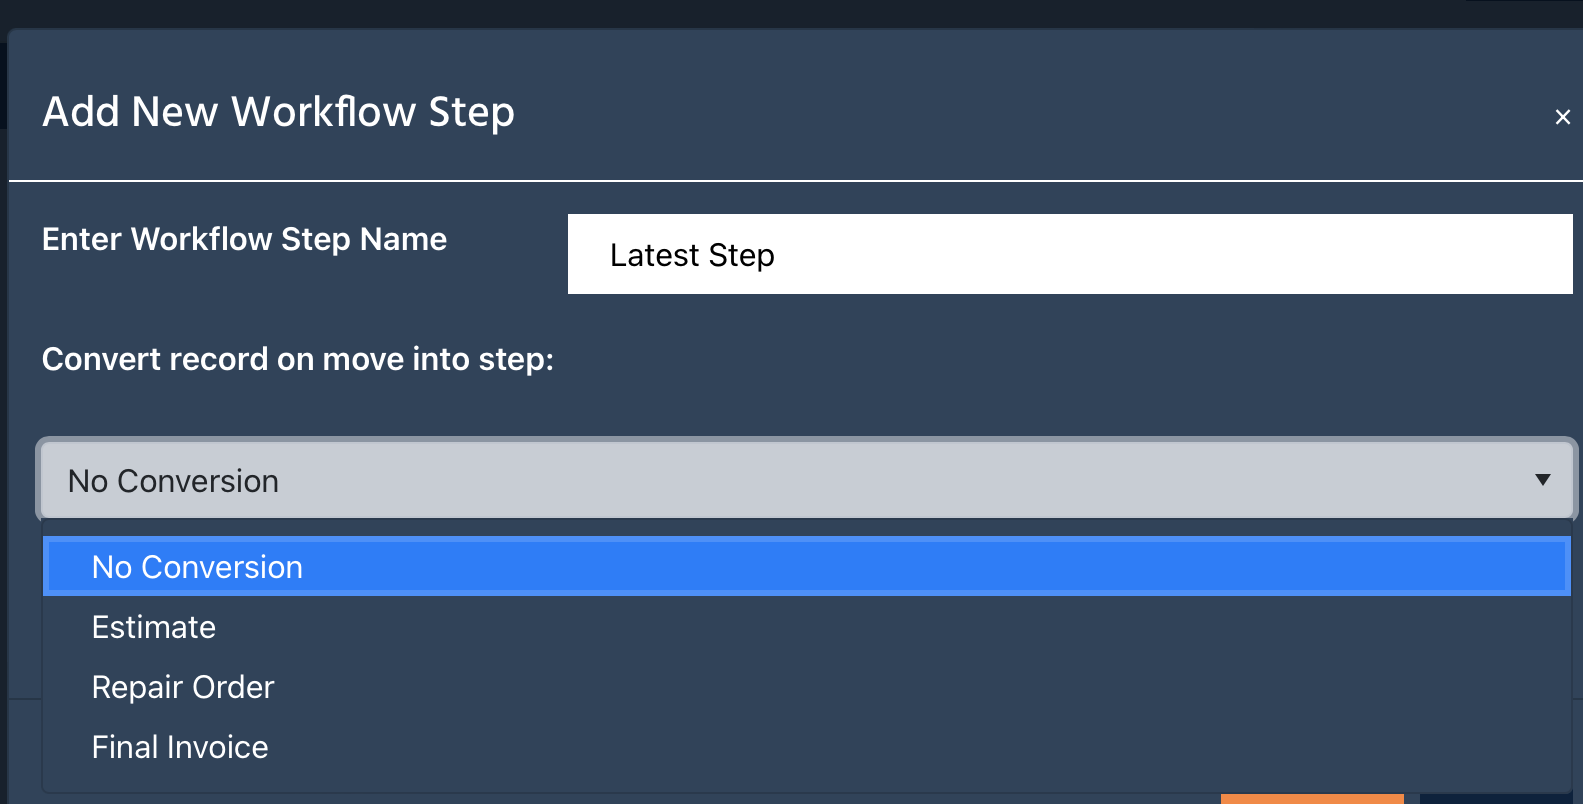 When you add or edit a workflow step, you have the ability to change what happens when a ticket is moved into a given step